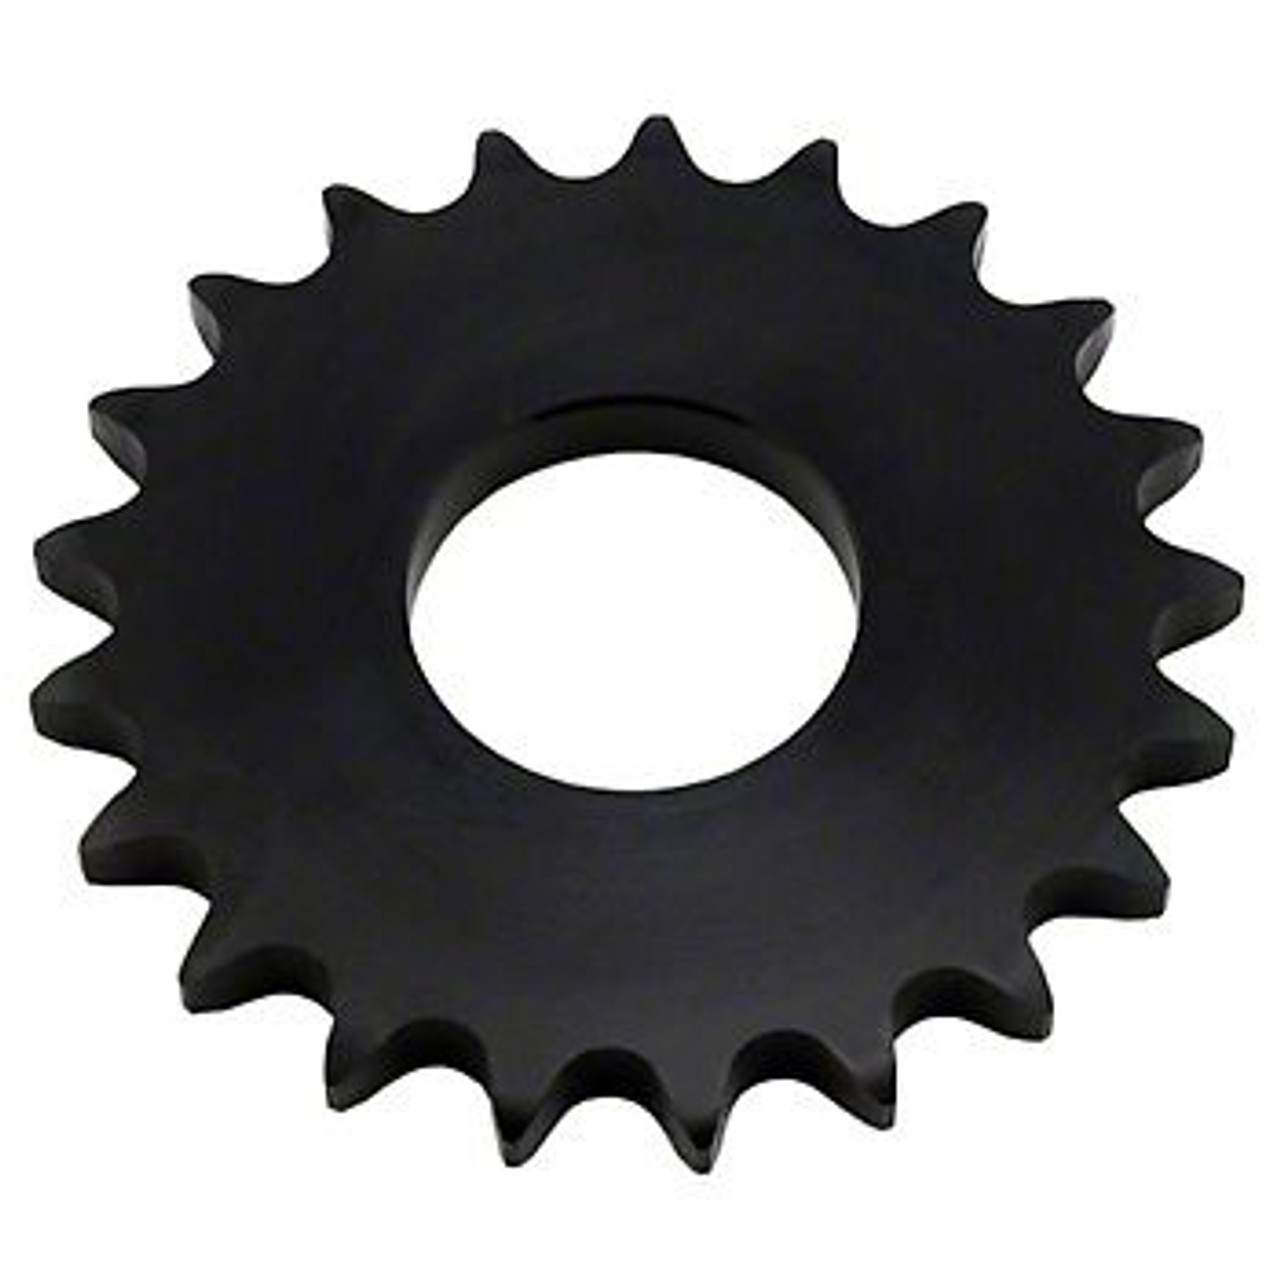 Hardened Tooth Weld-On Sprocket   H60X45